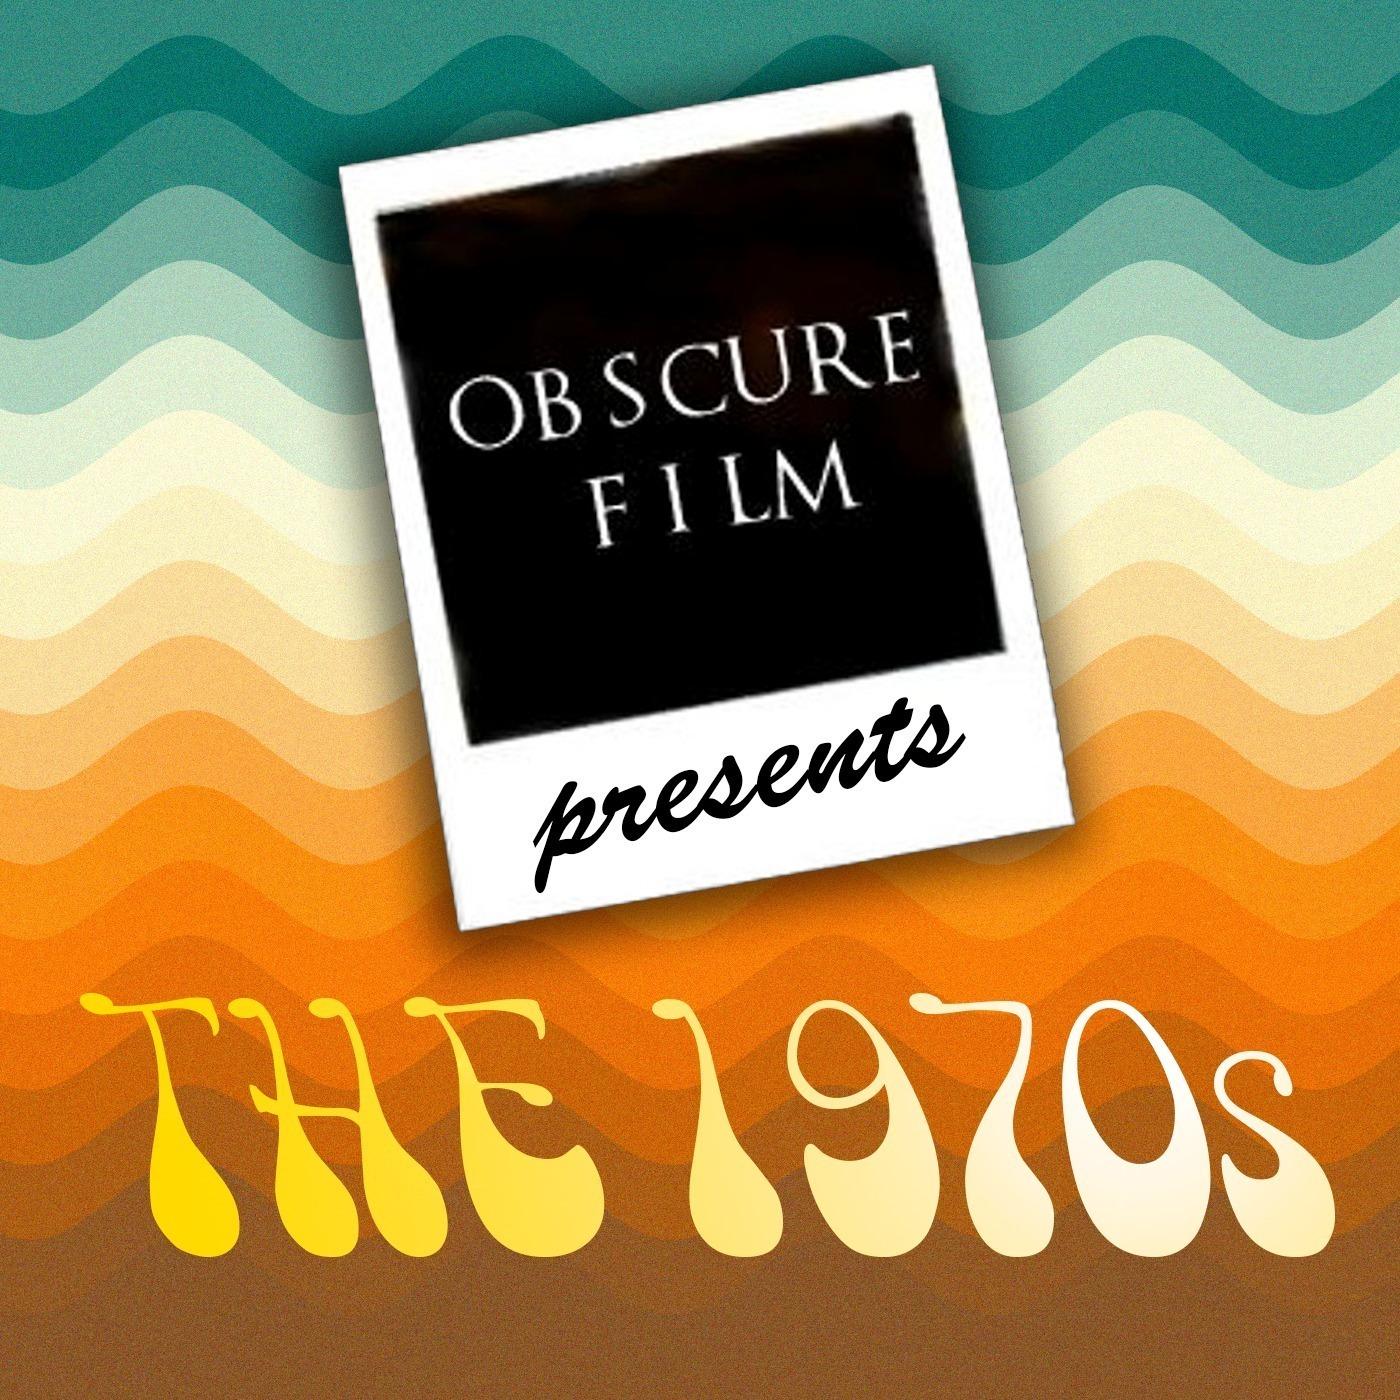 ObscureFilm Presents: The 1970s